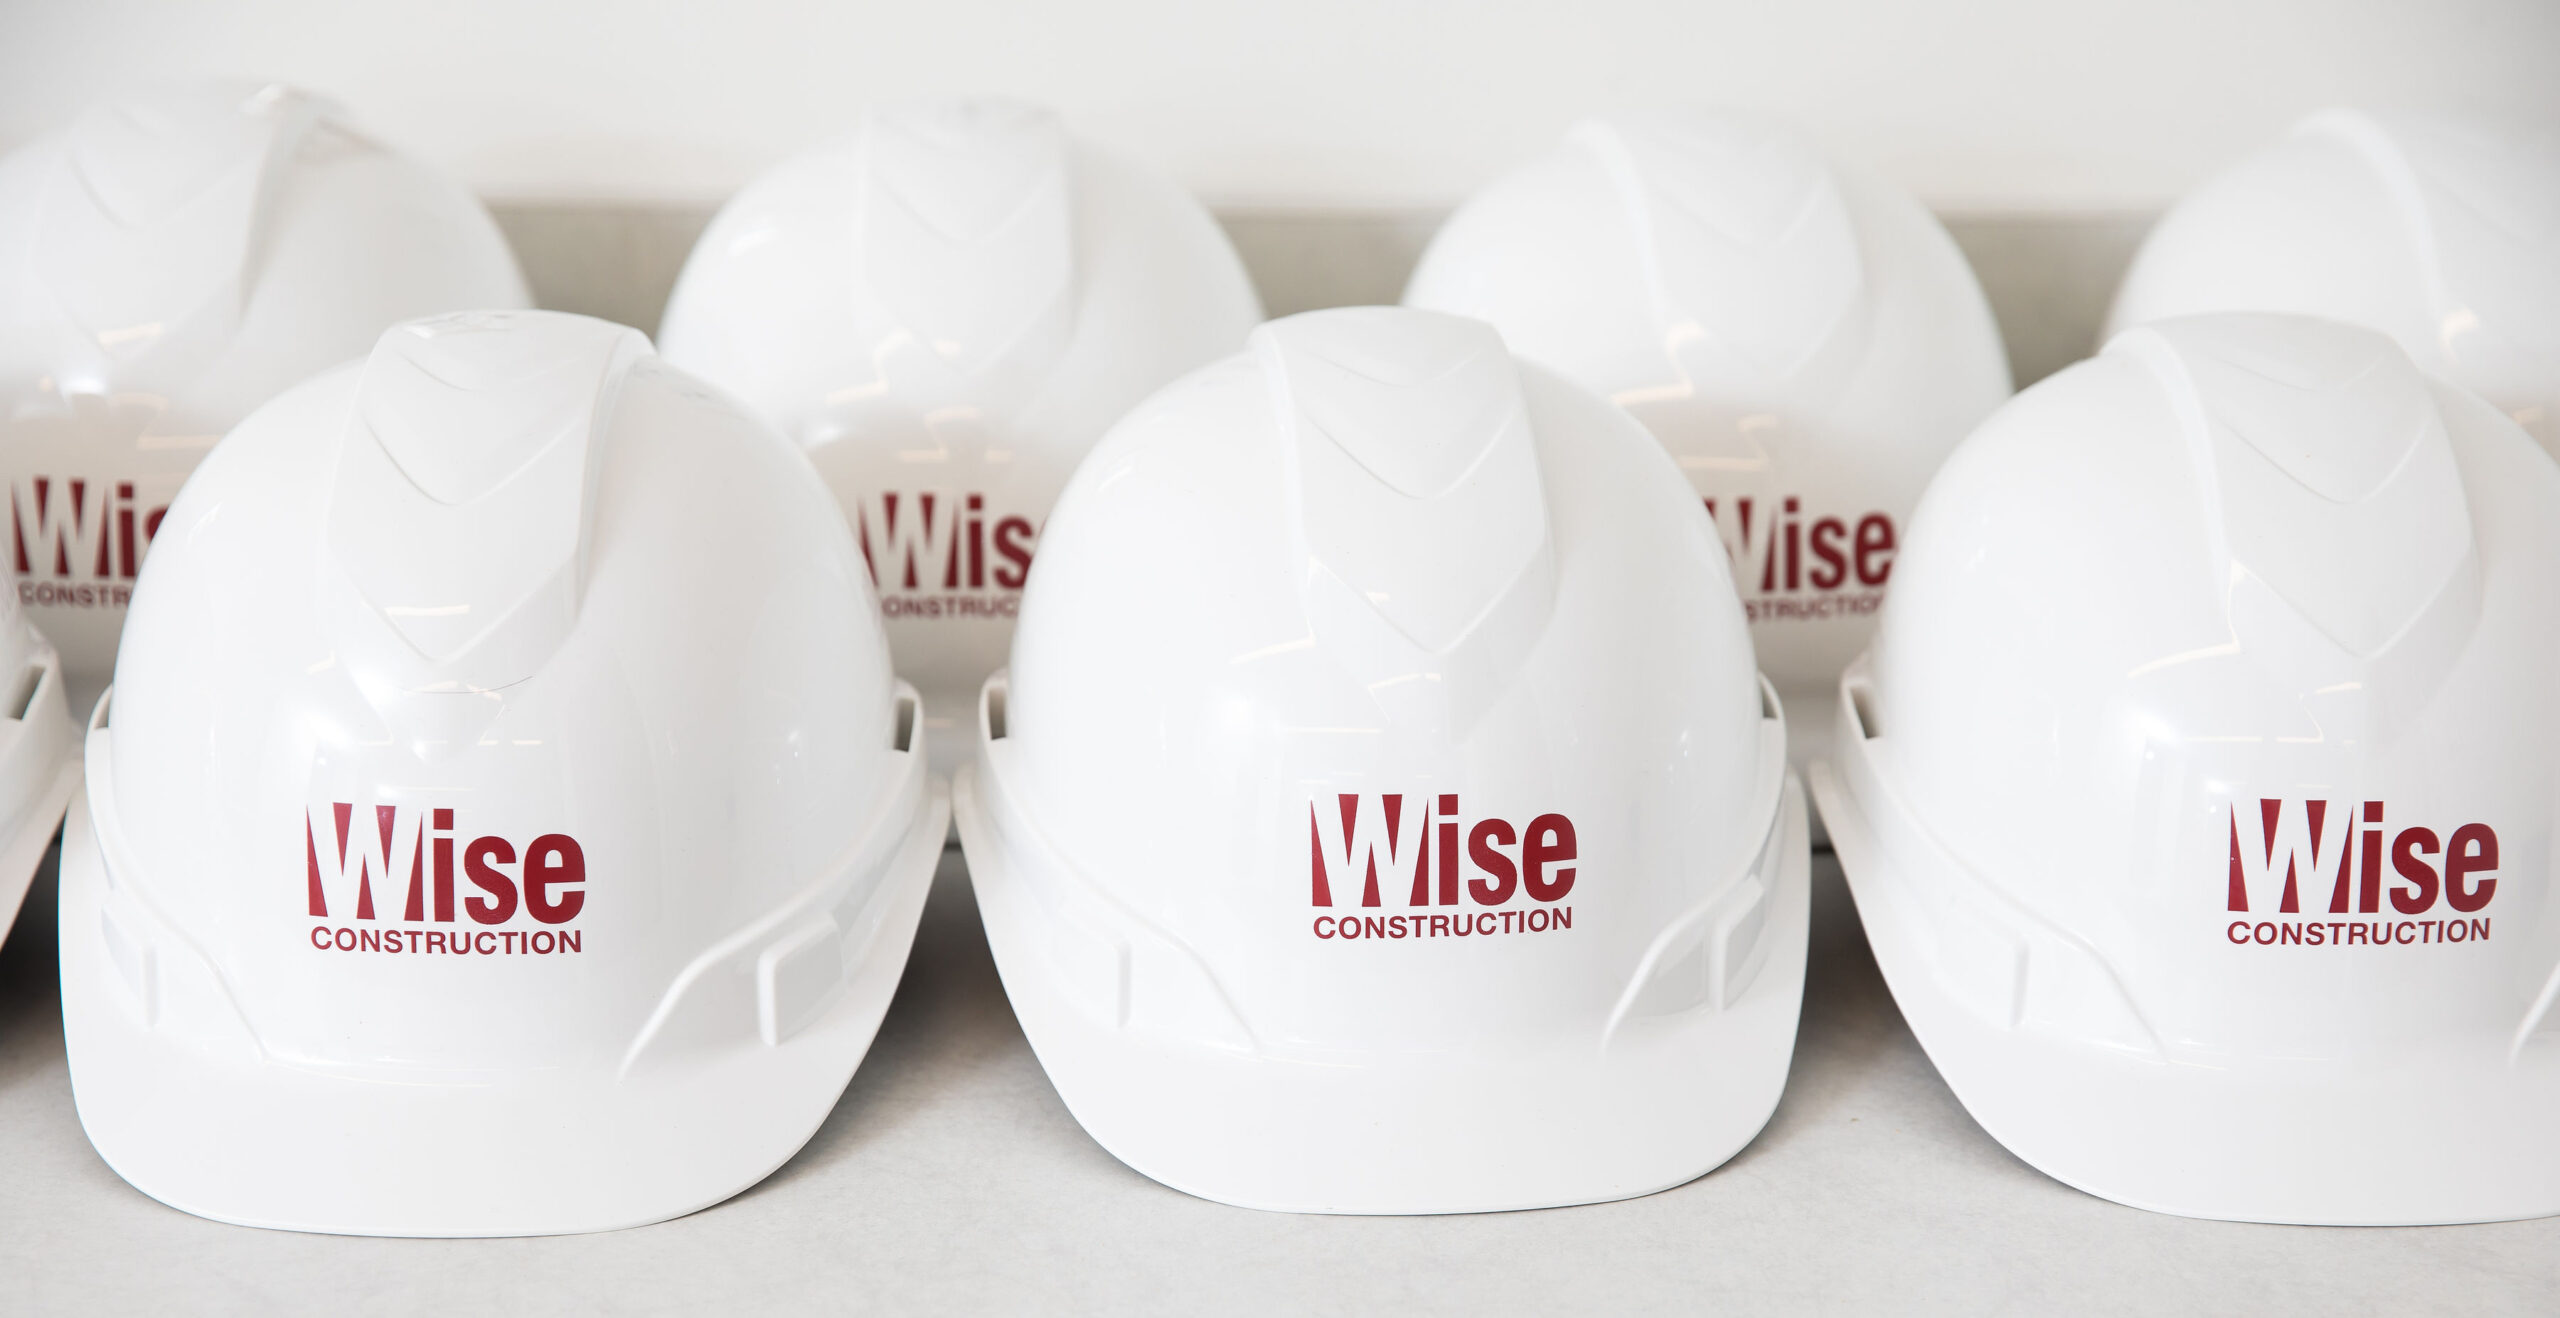 Wise Construction hard hats lined up on a table.